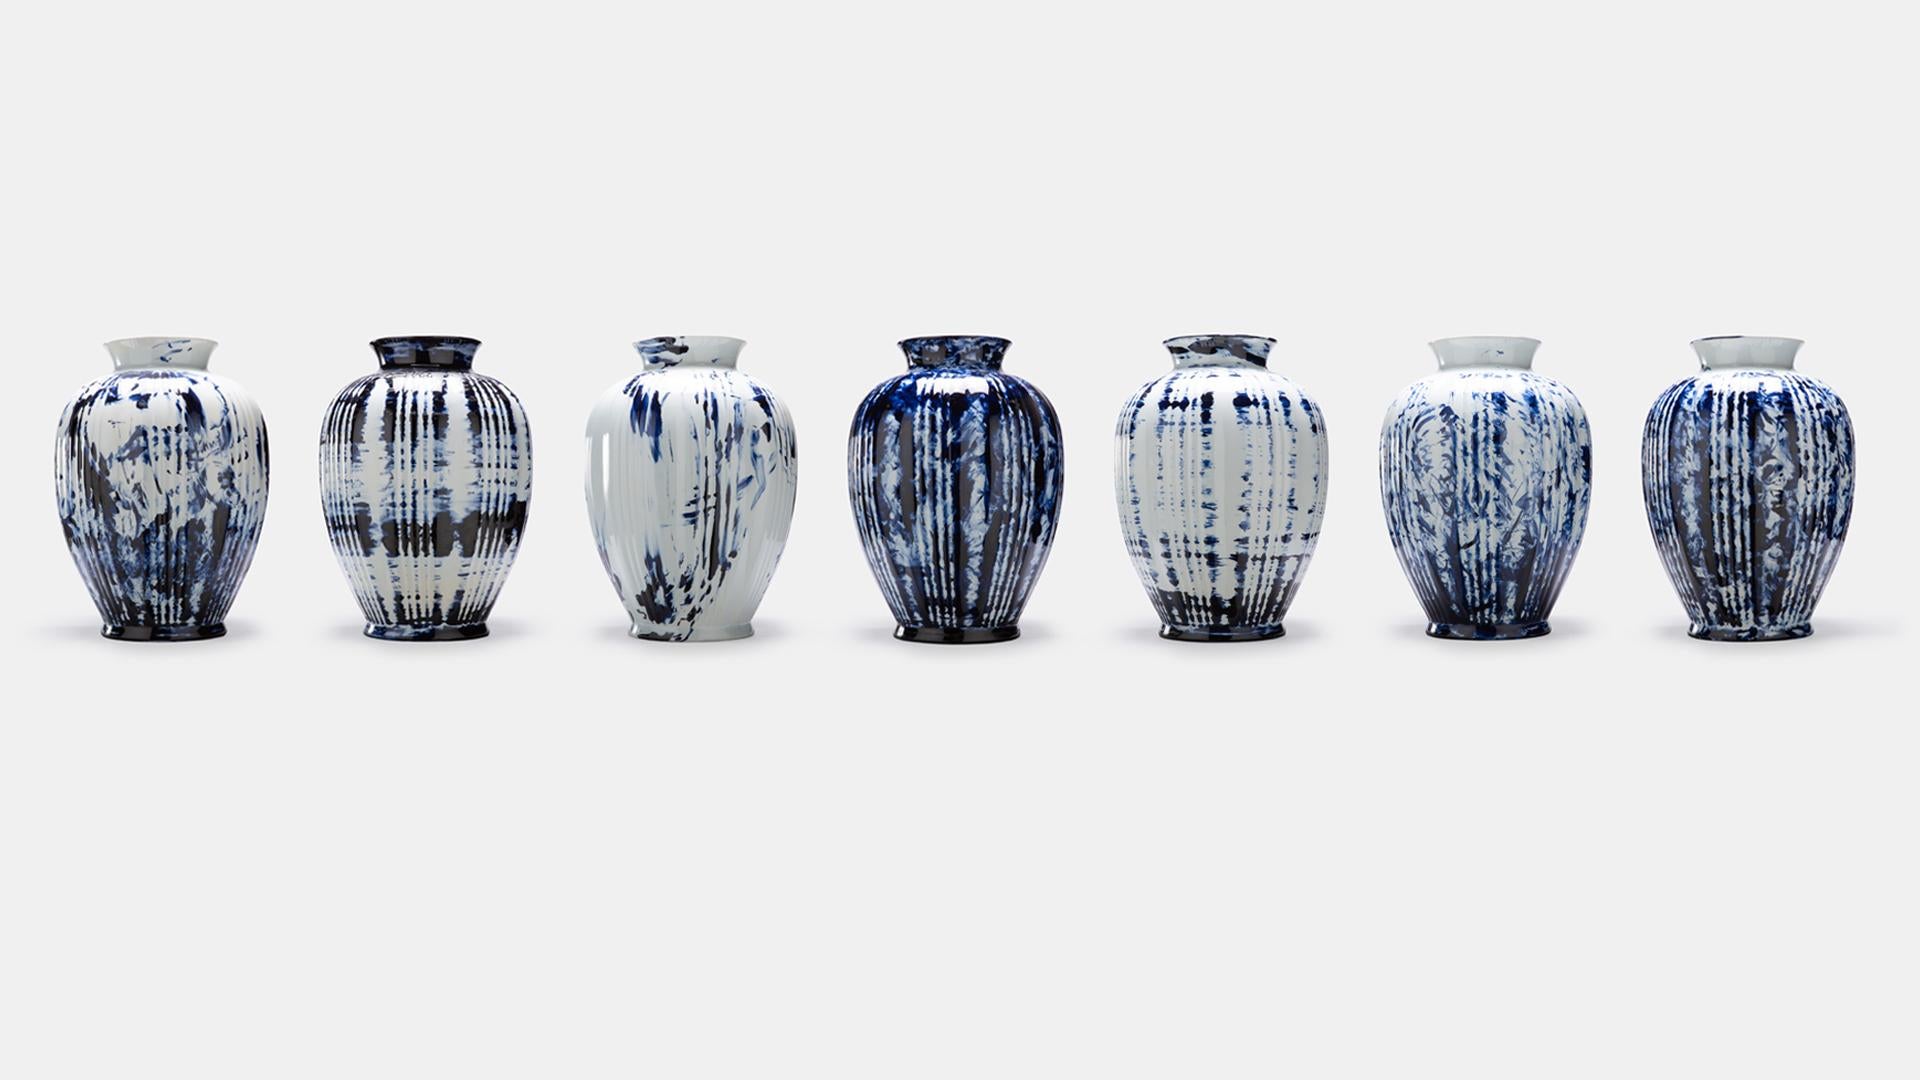 One Minute Delft Blue - Vase Big is available as an exclusive Personal Edition, Marcel's label carrying works of a more personal and experimental nature. The pieces of the Delft Blue series are unlimited unique by Marcel's One Minute Delft Blue